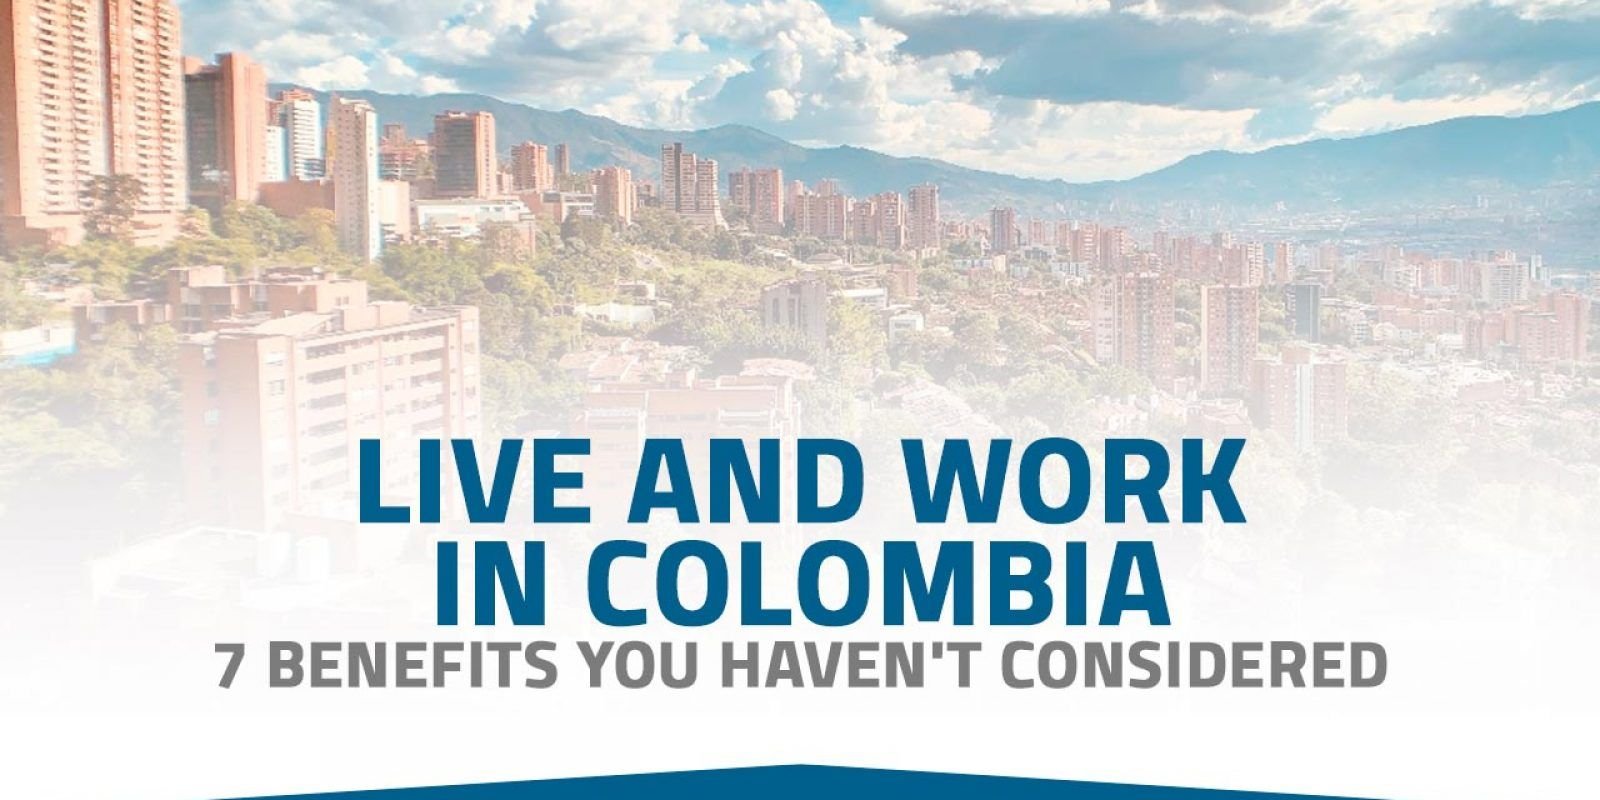 Live and Work in Colombia: 7 Benefits You Haven't Considered